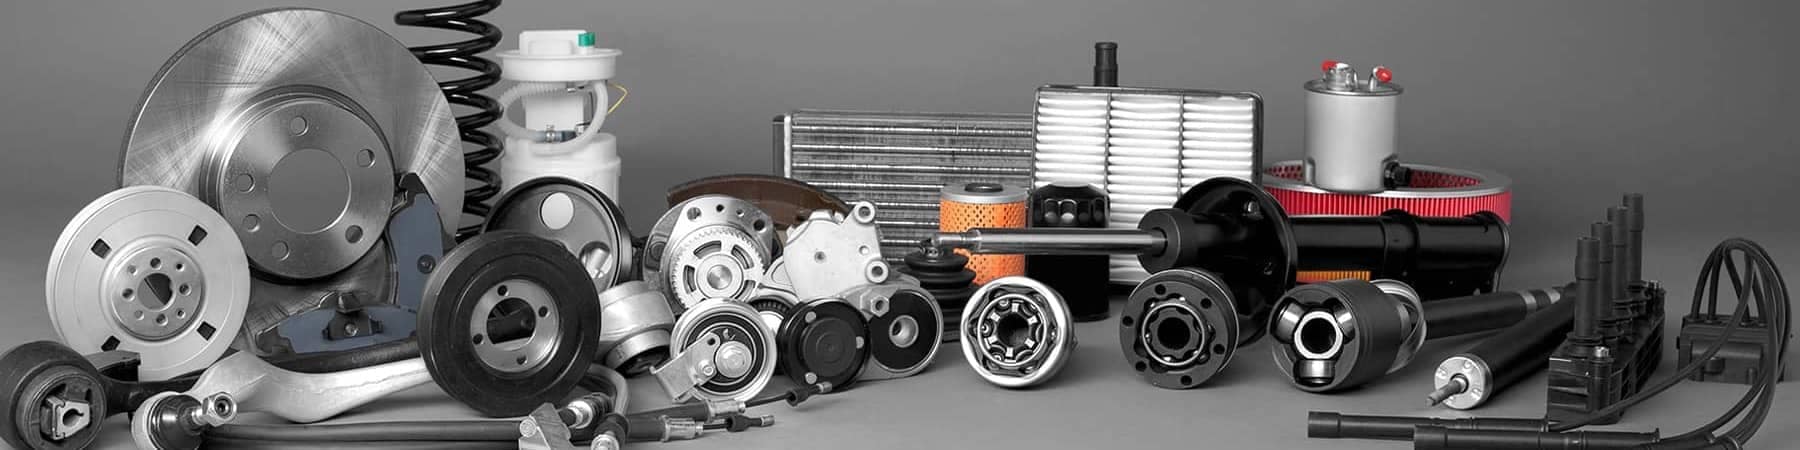 Various Car Parts on Grey Background